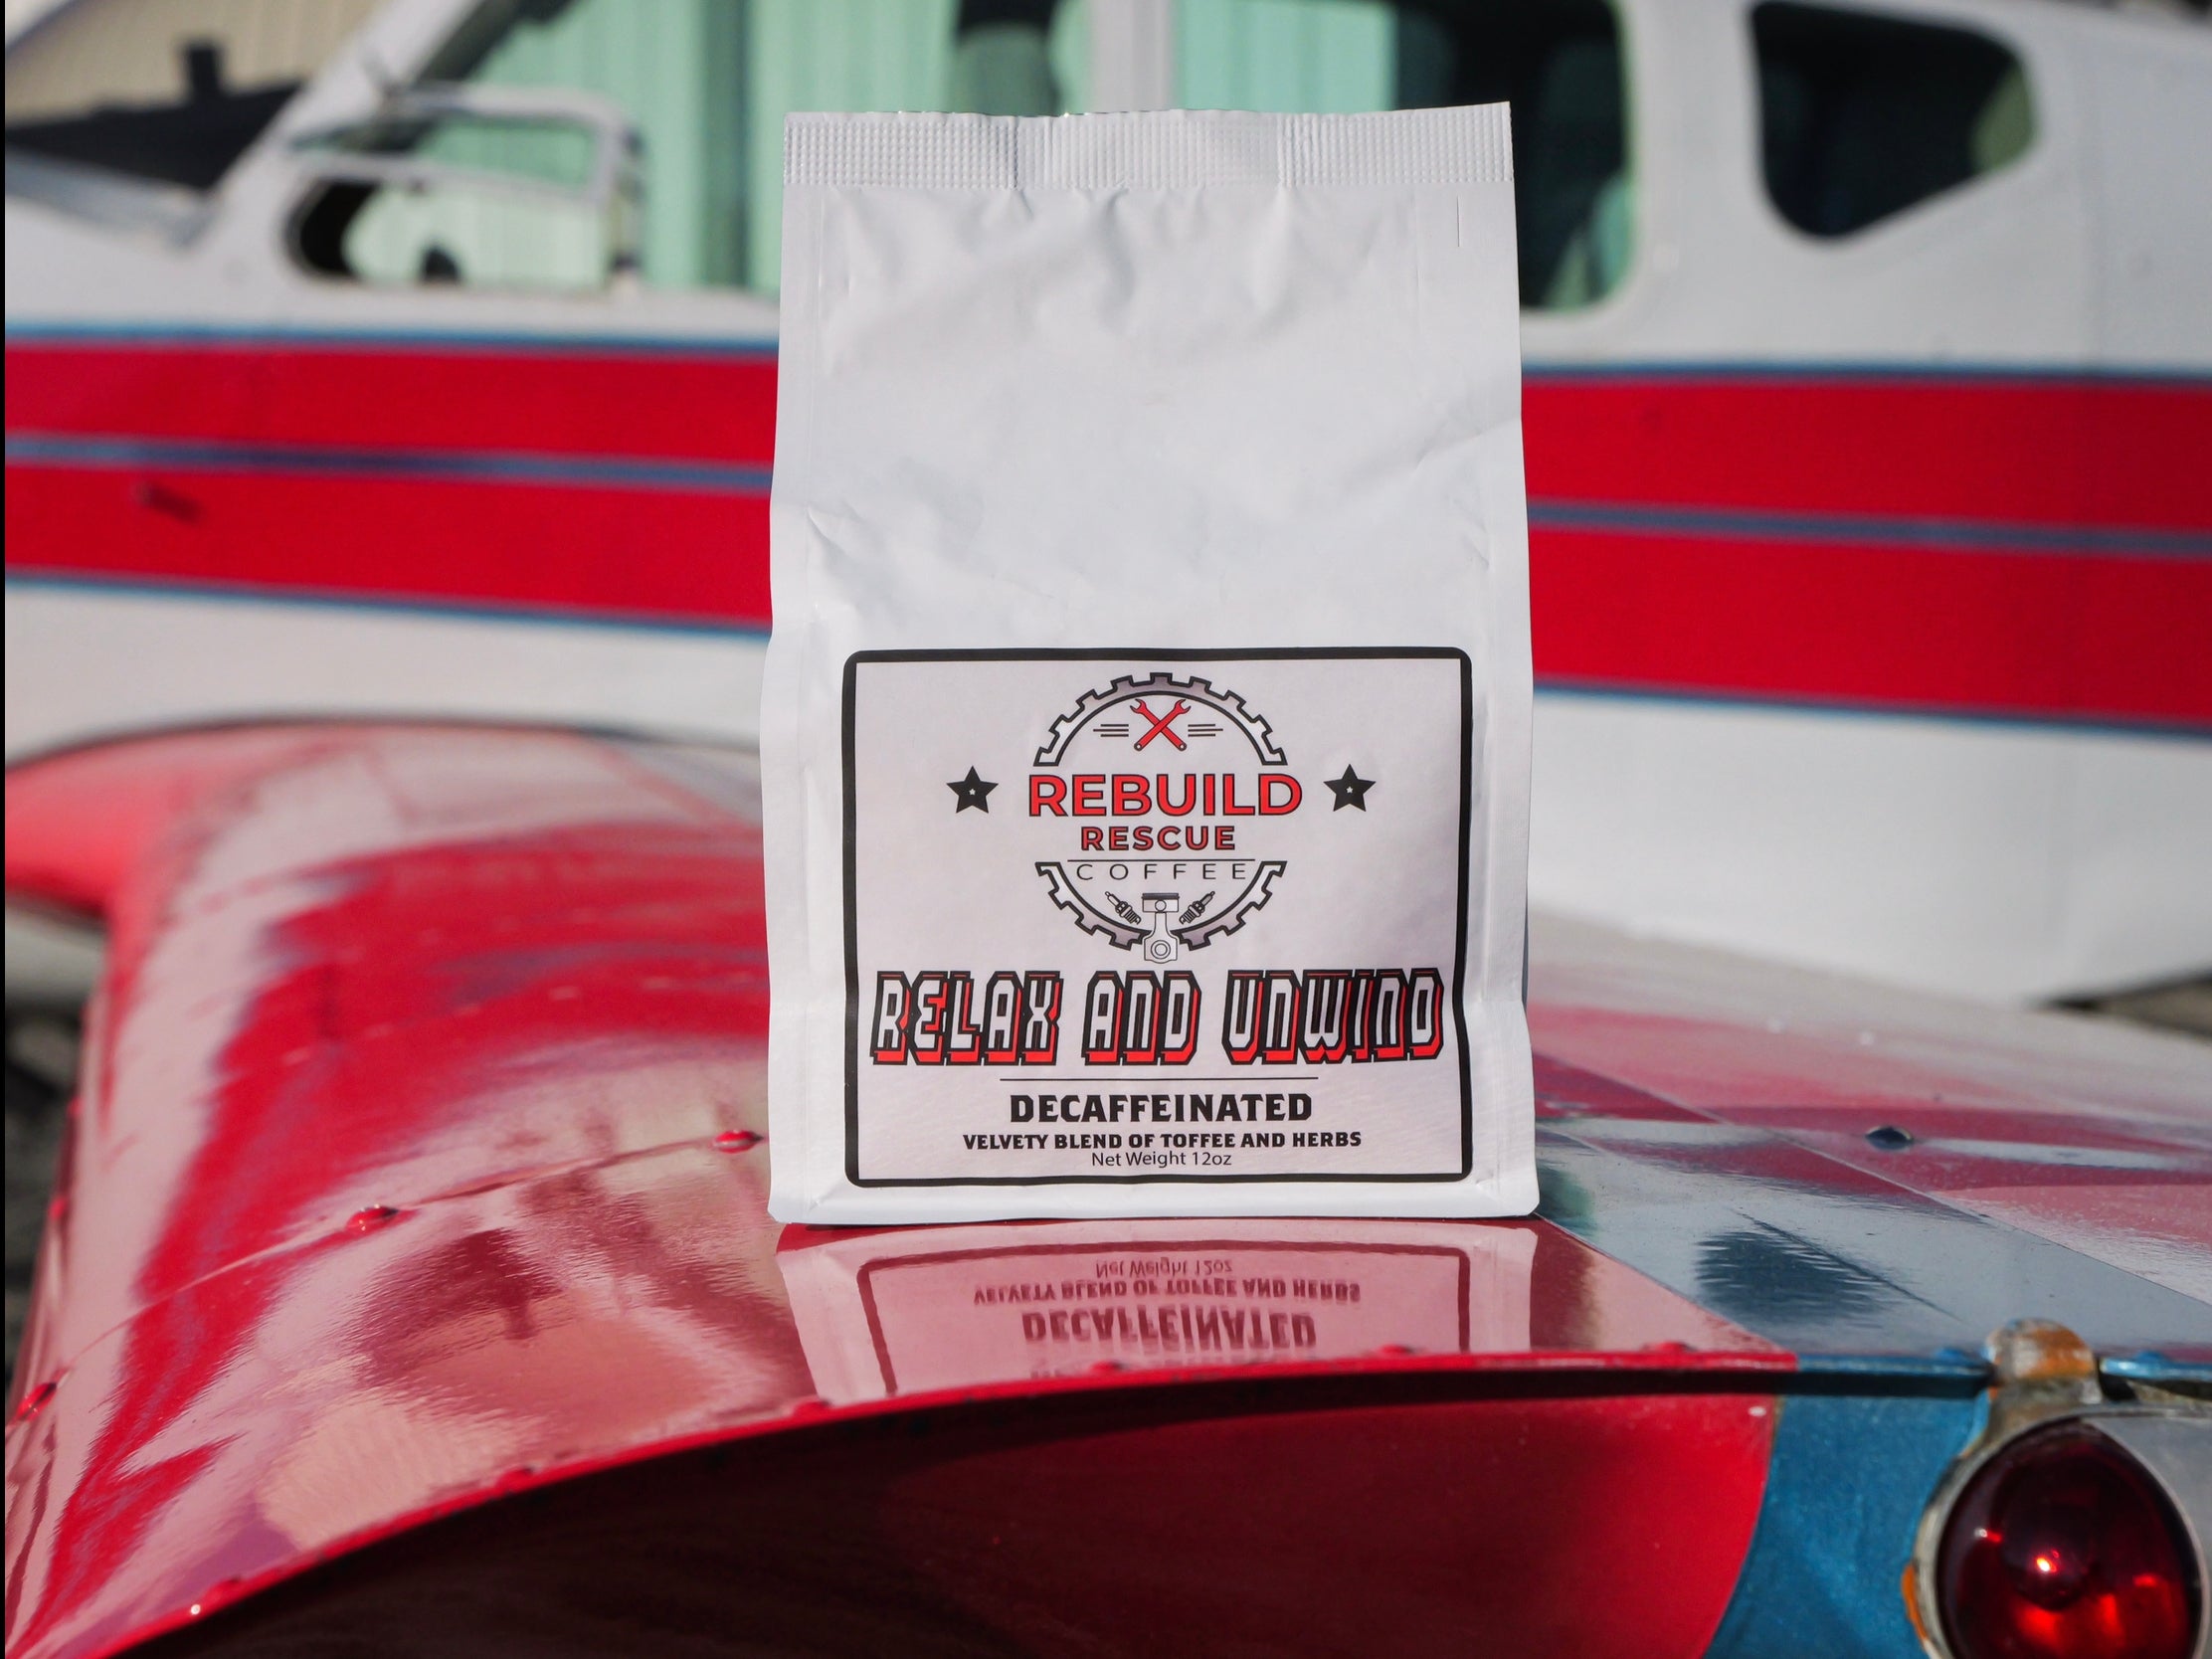 Rescue Coffee - Relax and Unwind (Decaffeinated)